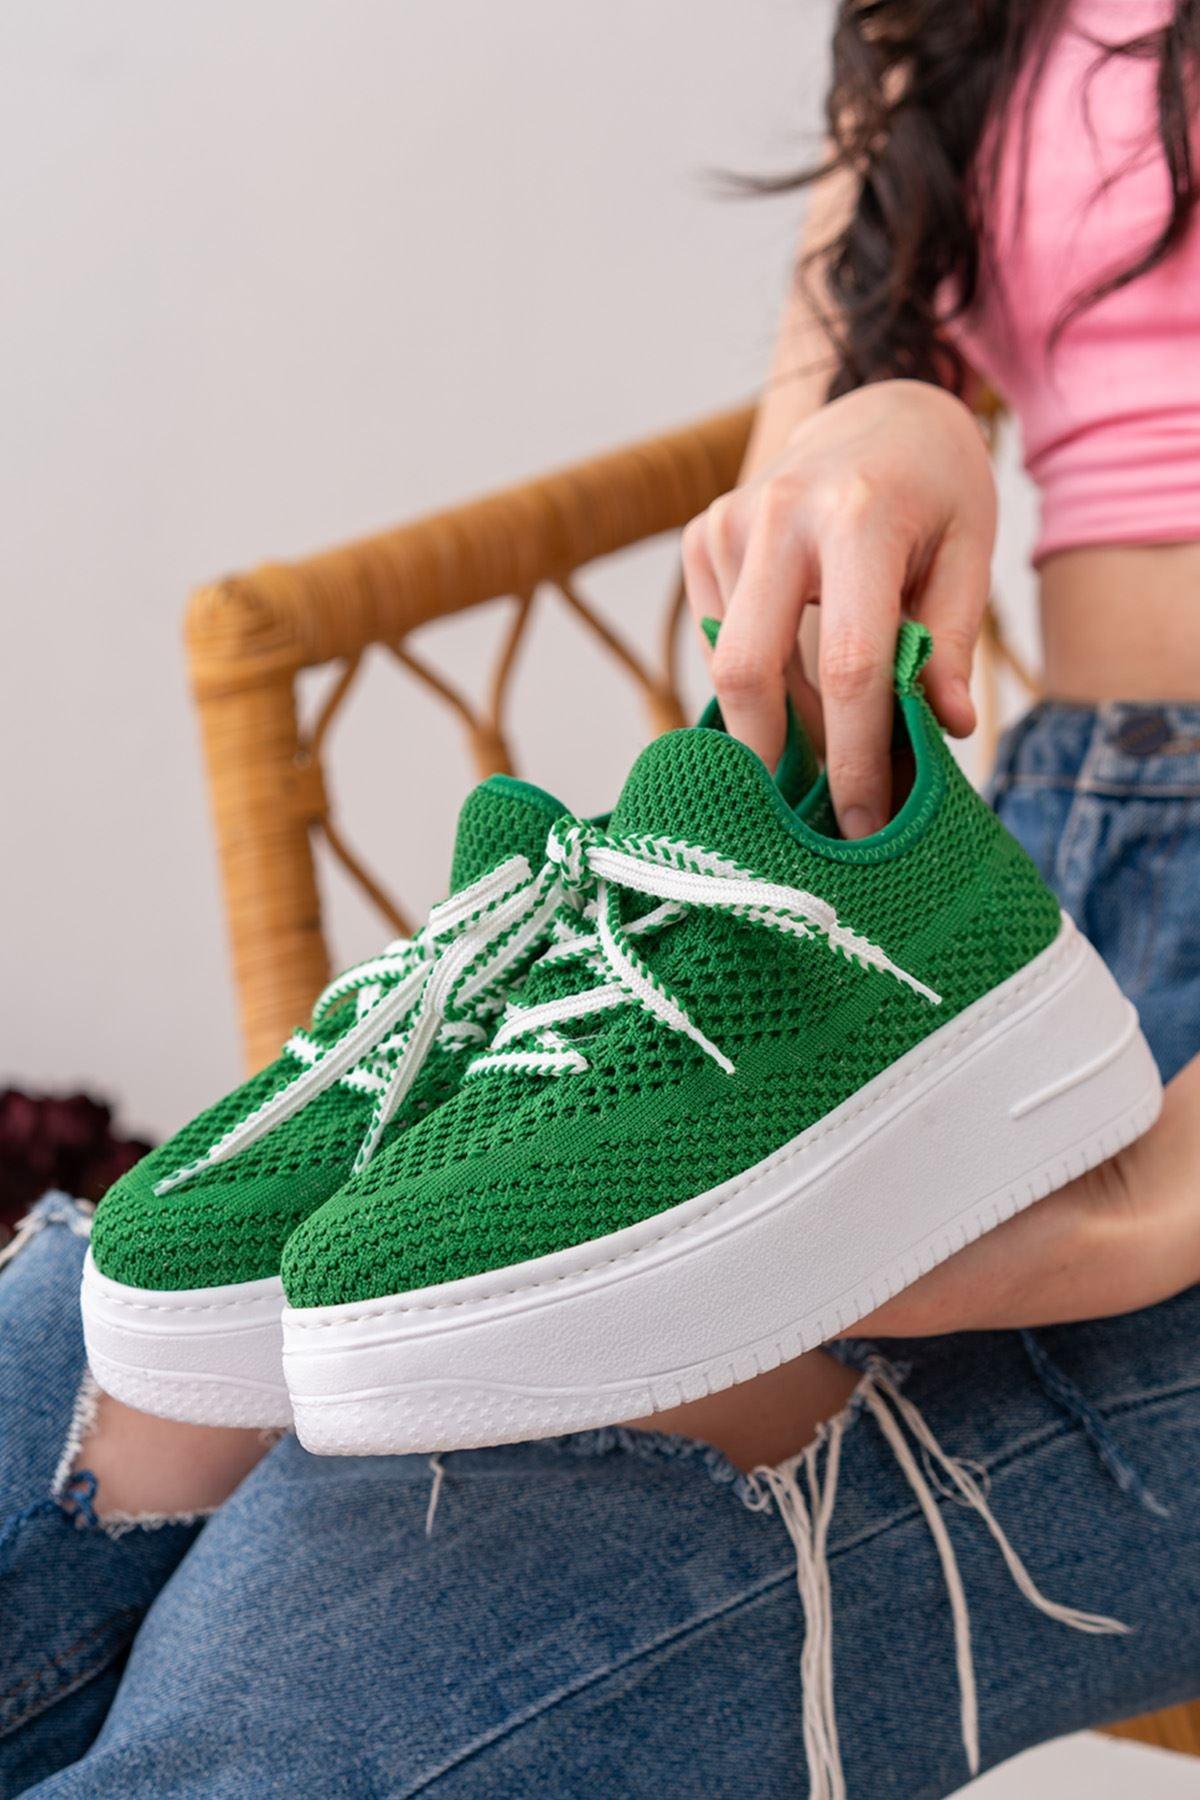 Women's Grito Green Knitwear Stretch Thick Soled Sneakers shoes - STREET MODE ™